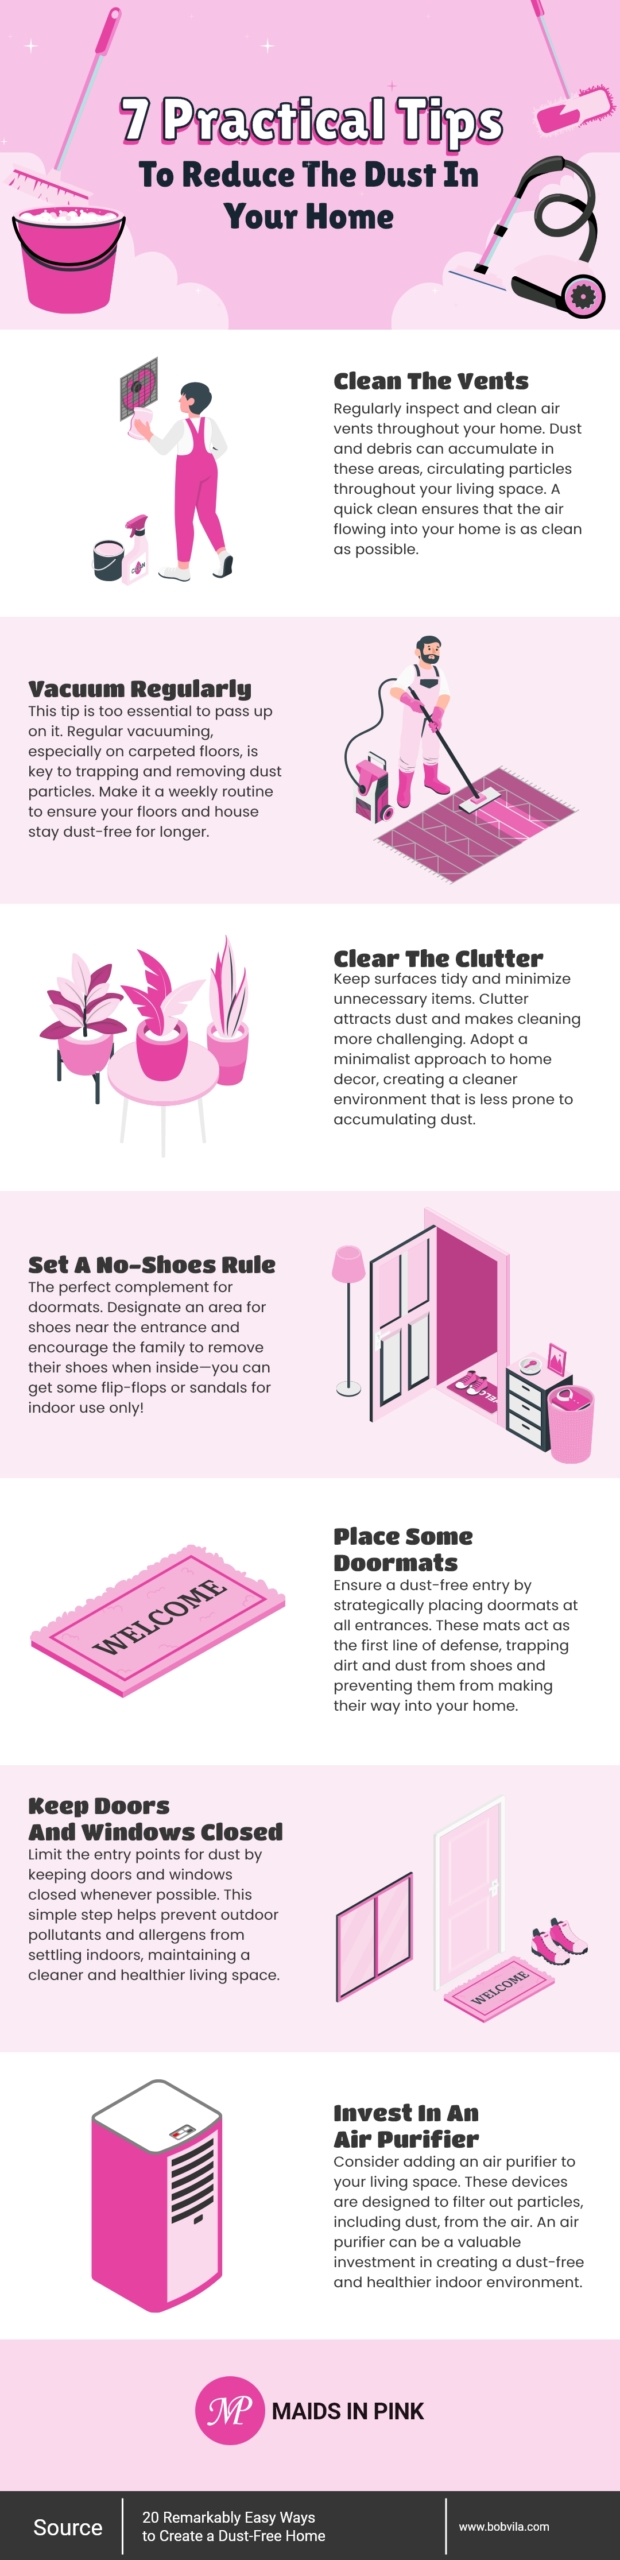 7-Practical-Tips-To-Reduce-The-Dust-In-Your-Home